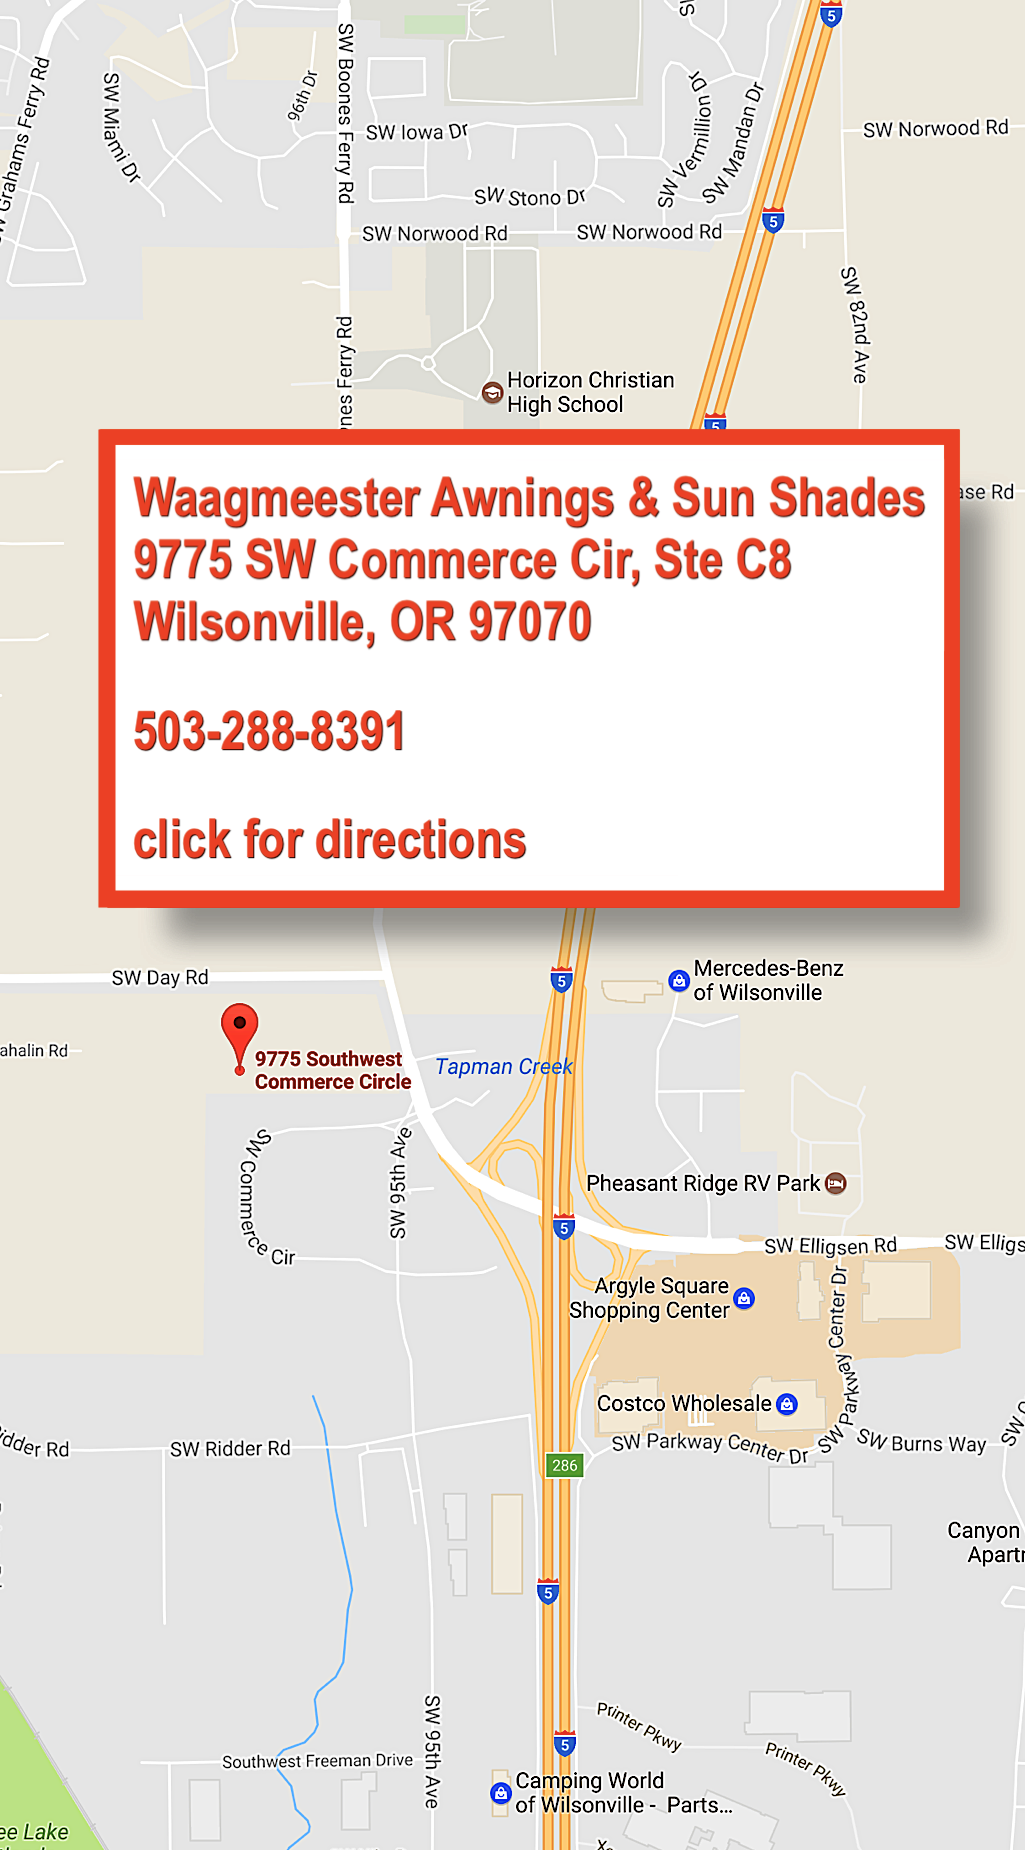 Contact Waagmeester Awnings